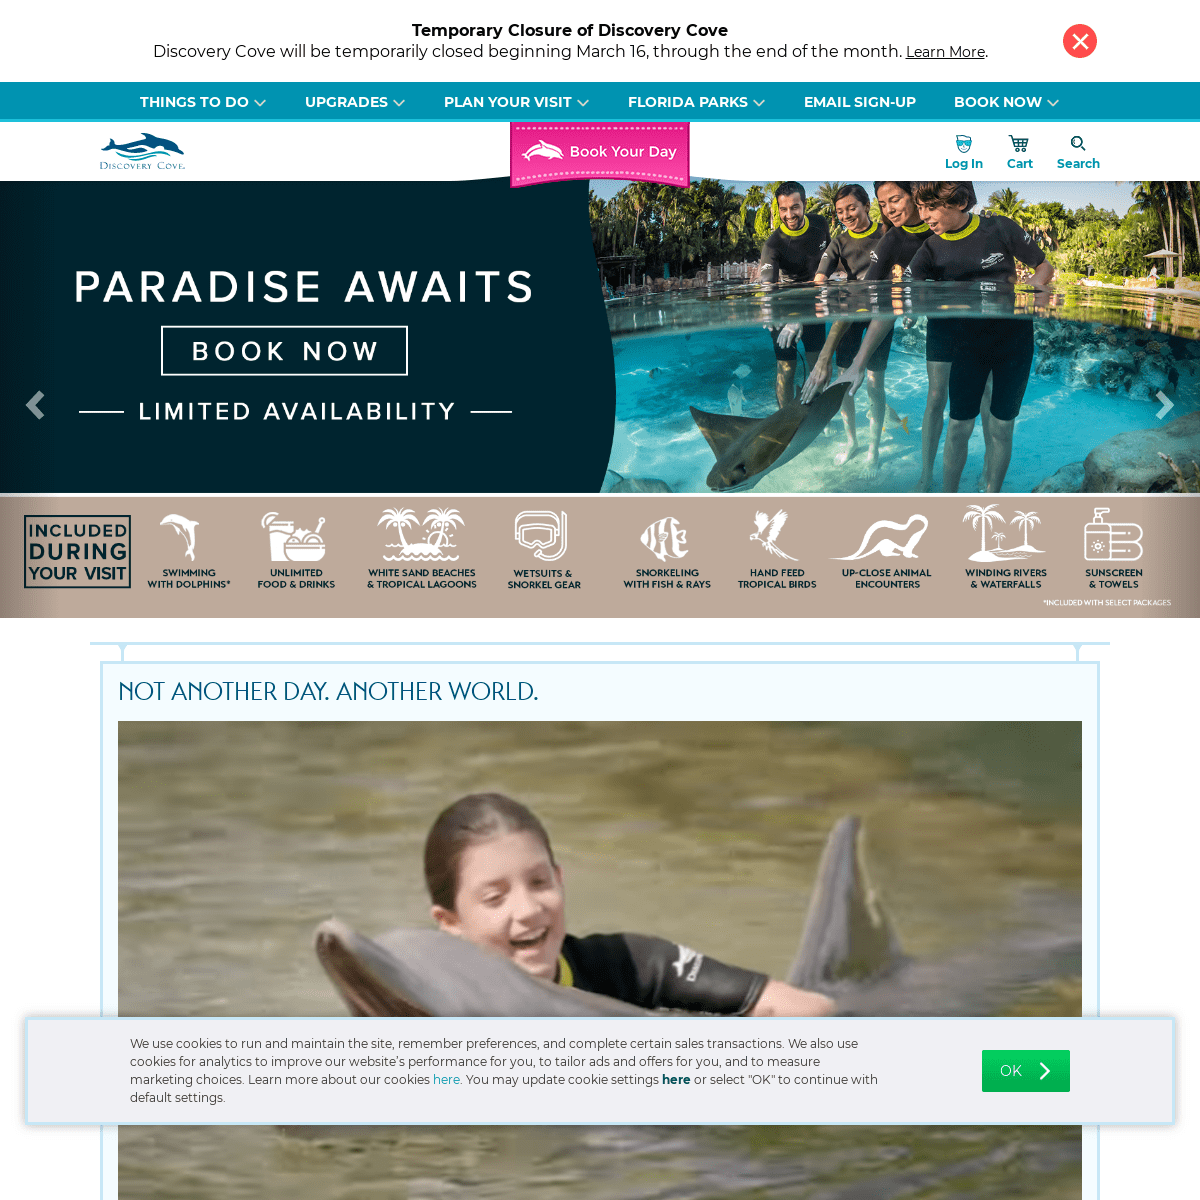 A complete backup of discoverycove.com